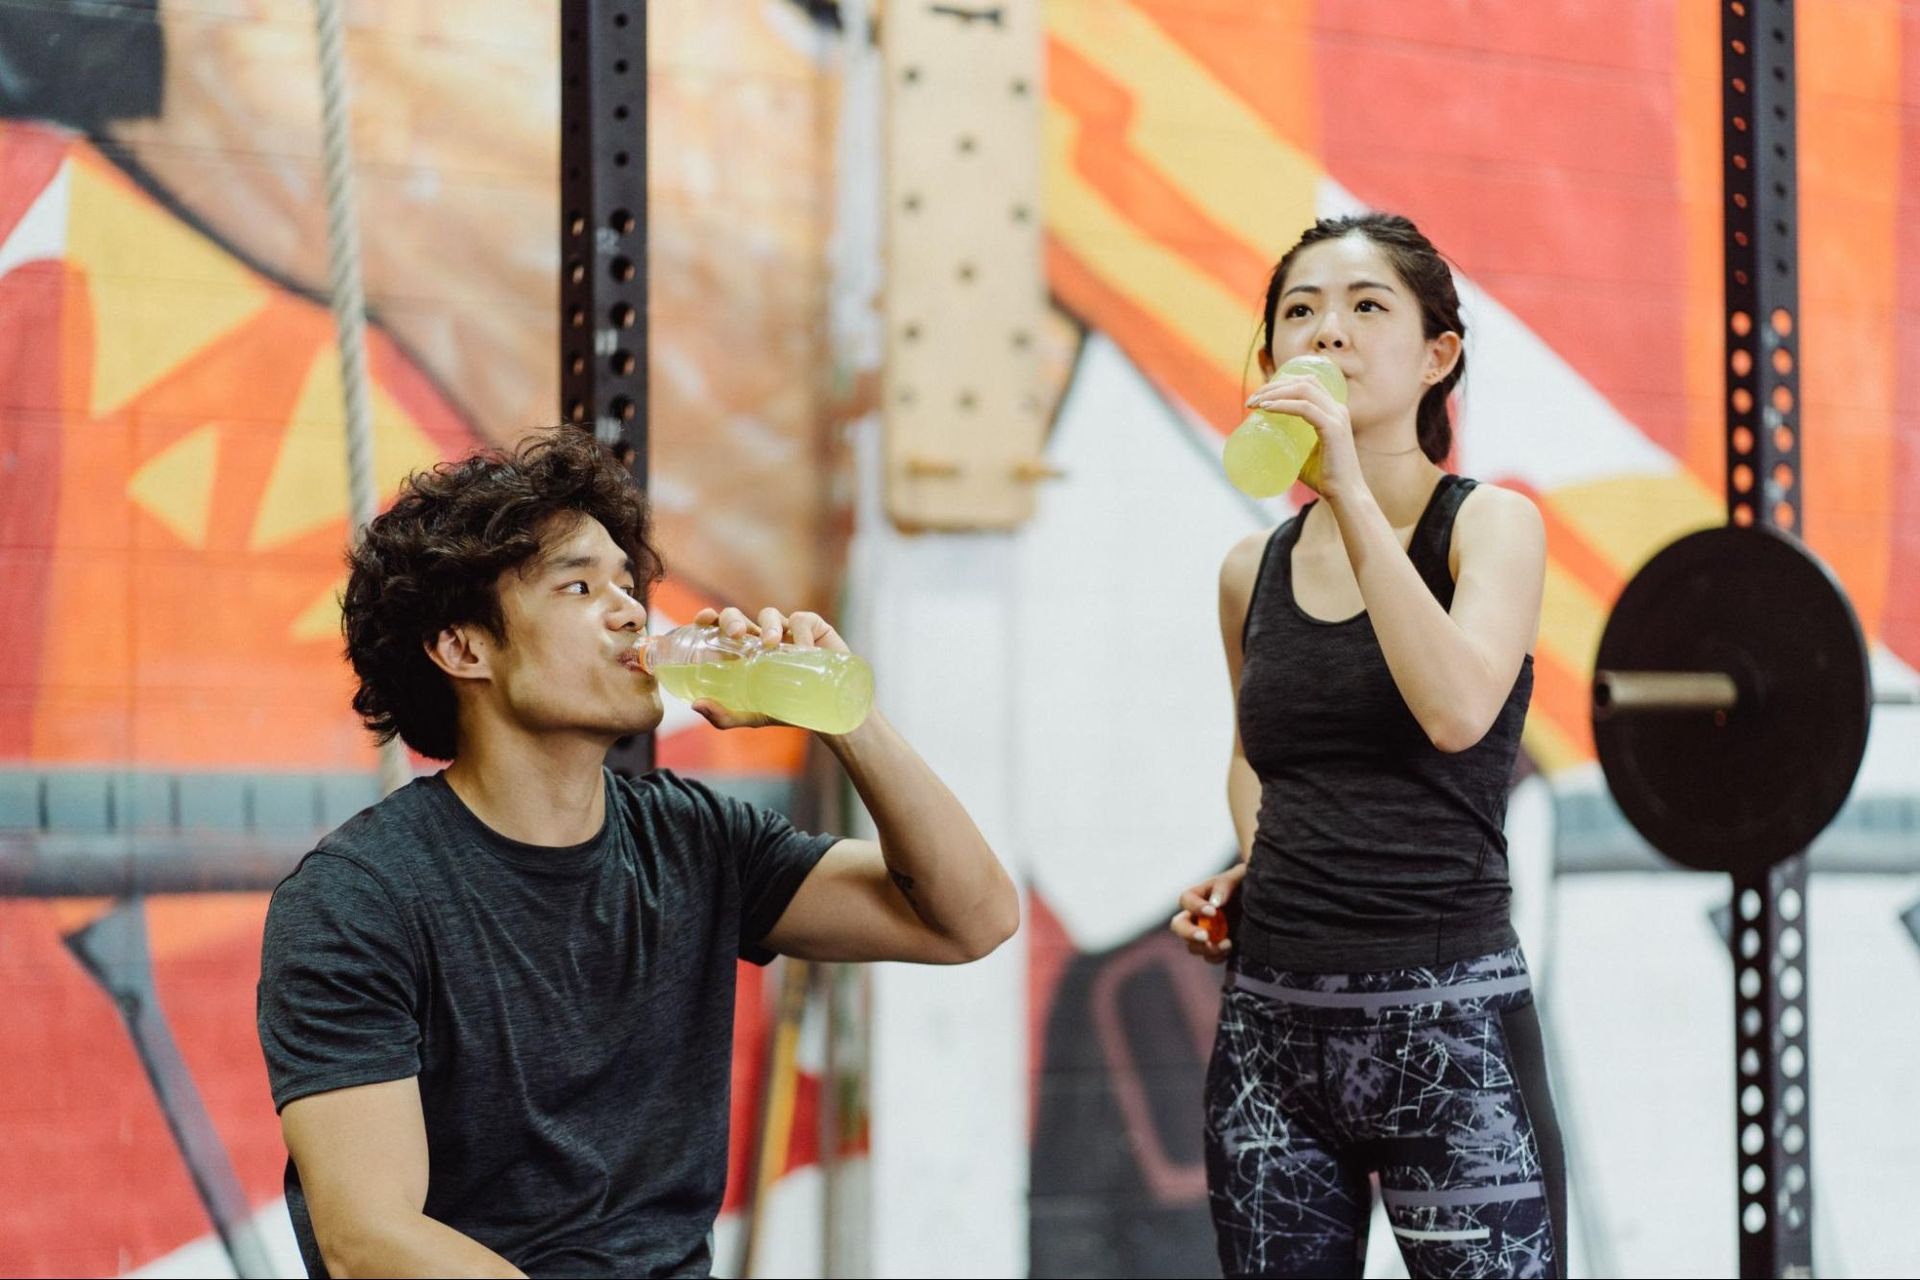 A man and girl hydrating after exercise in a gym